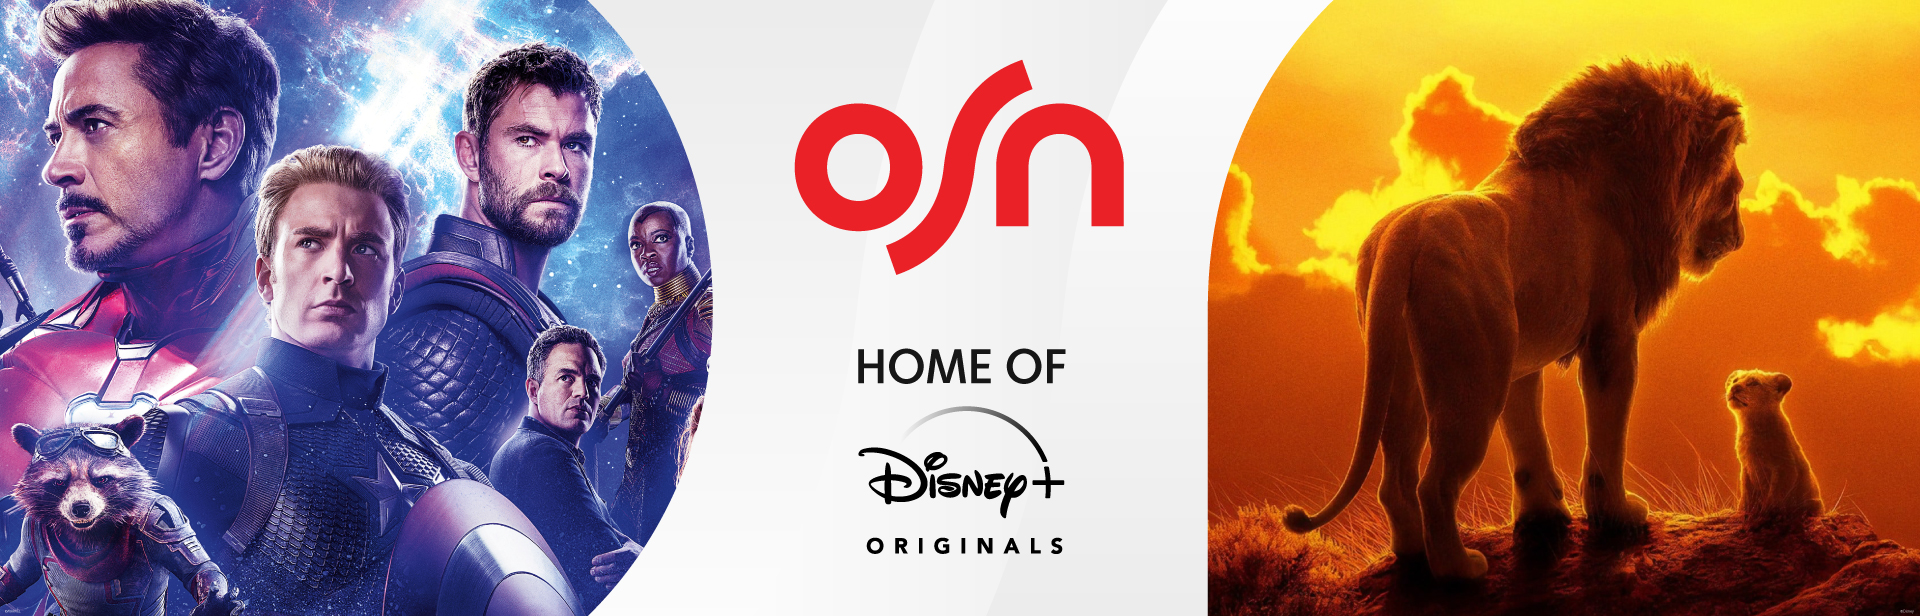 Watch Disney+ Movies and Shows on OSN